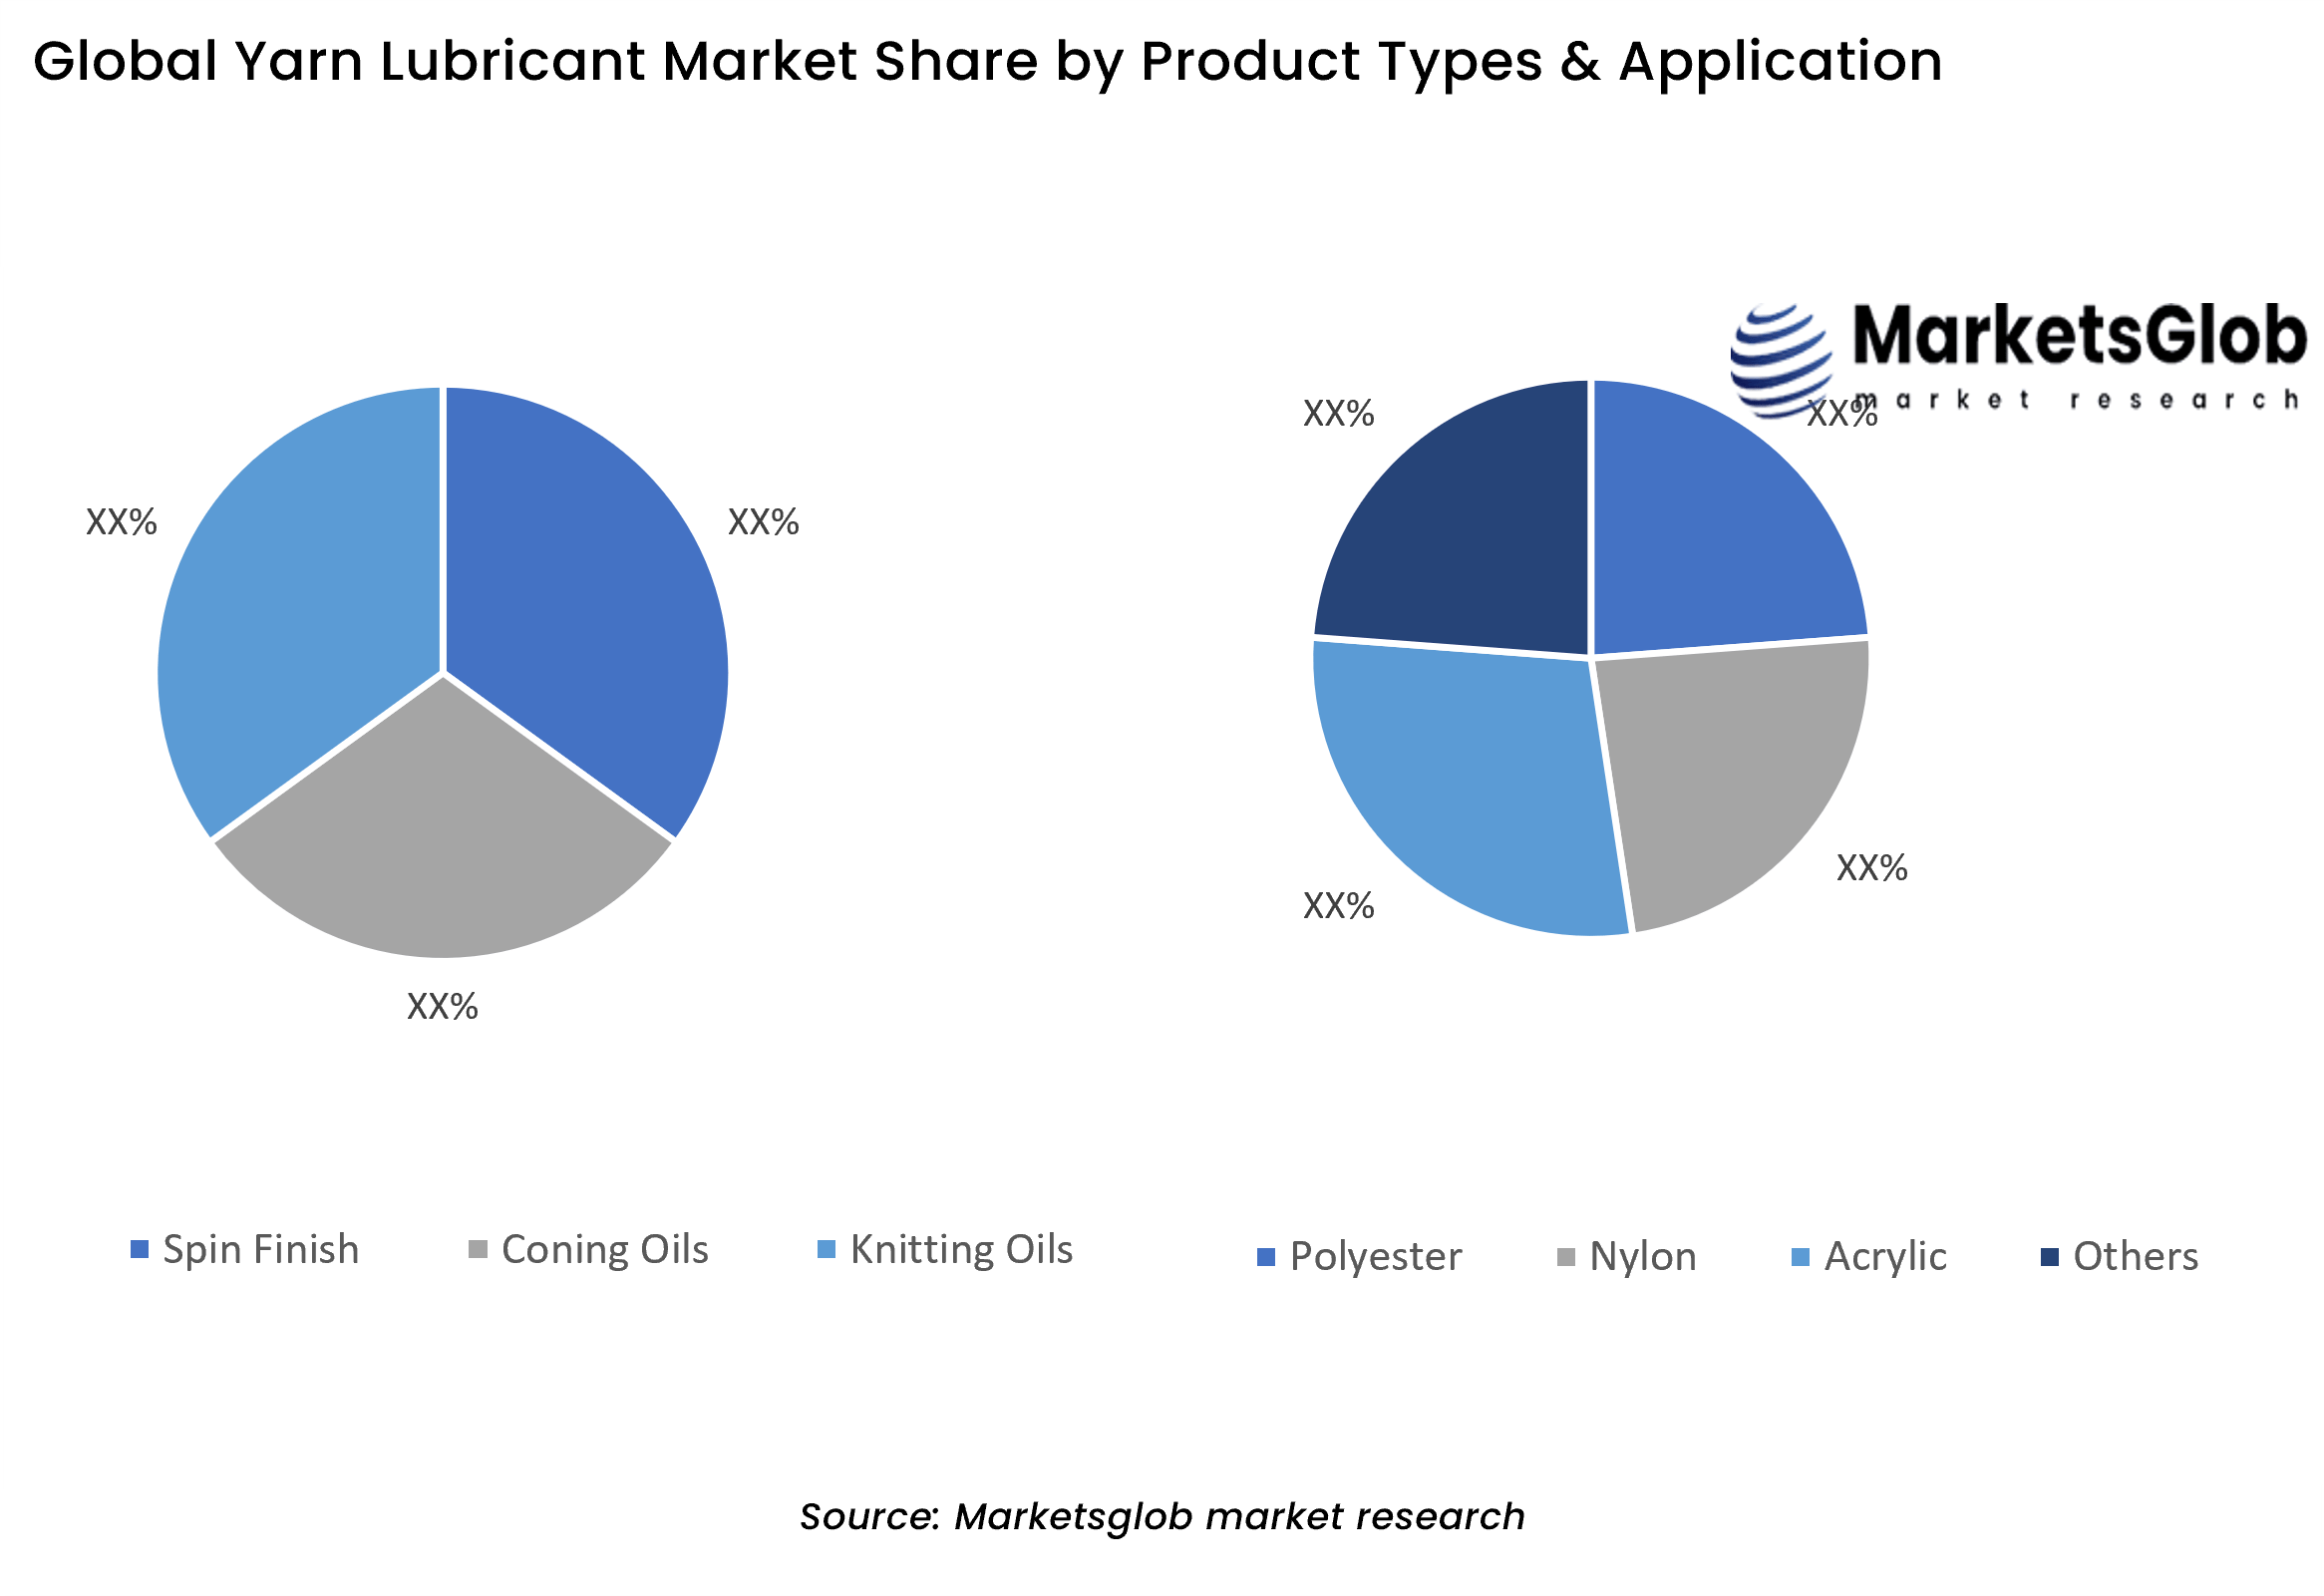 Yarn Lubricant Share by Product Types & Application